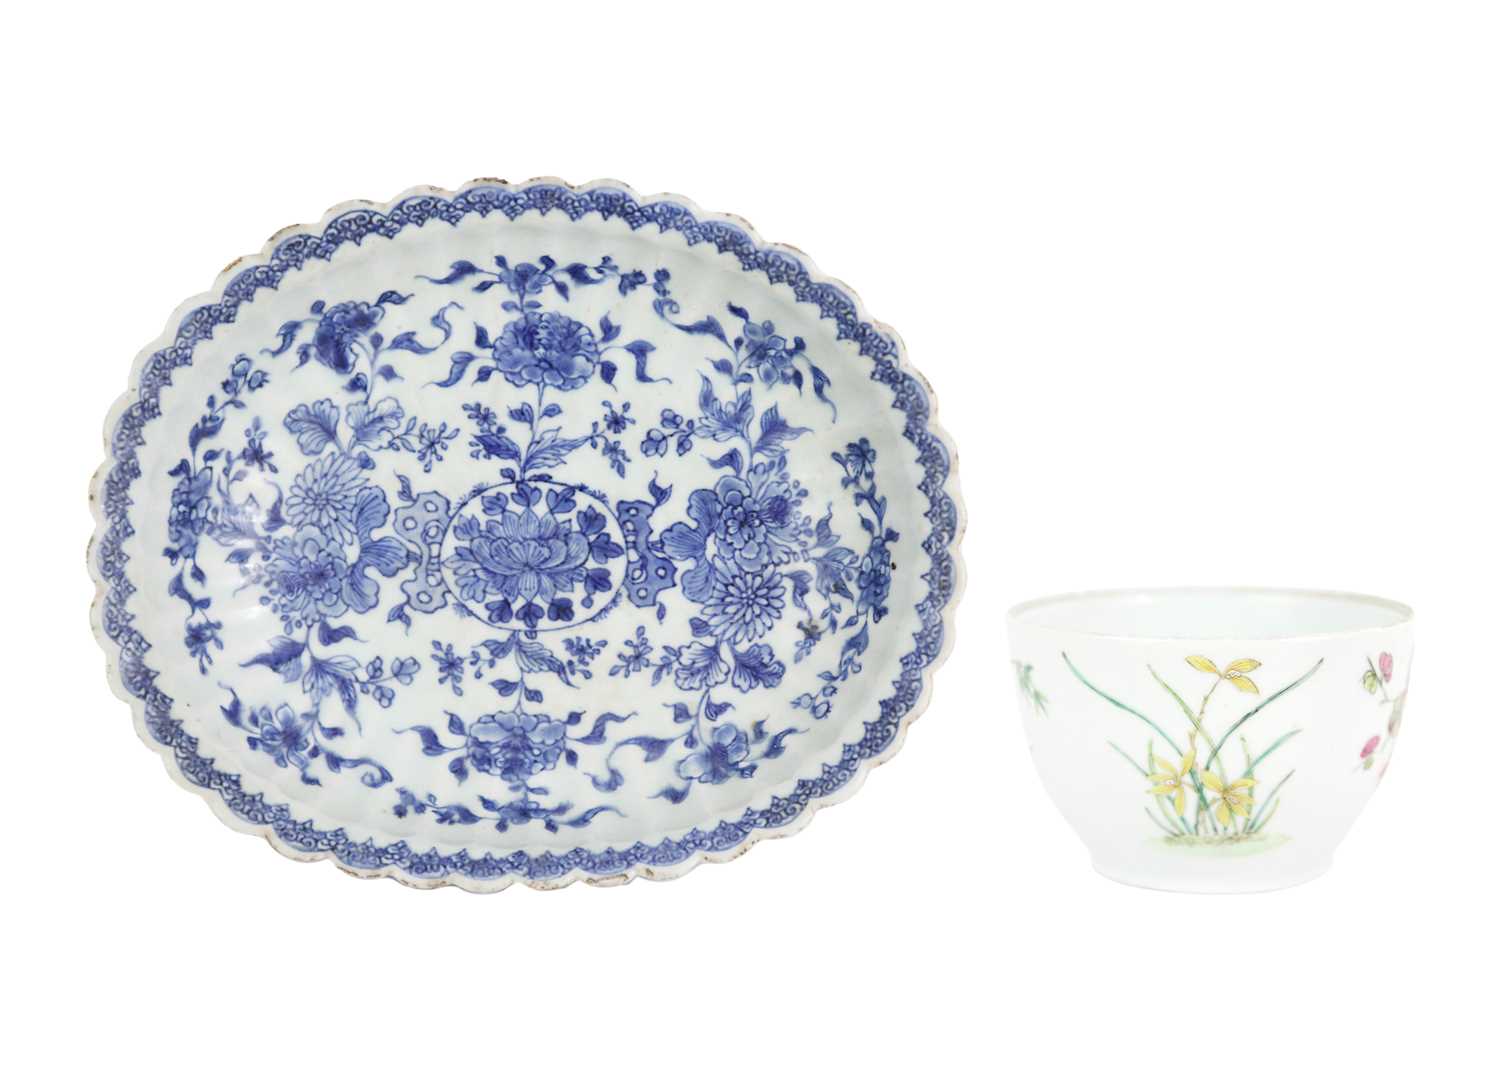 A Chinese export blue and white porcelain dish, 18th/19th century.